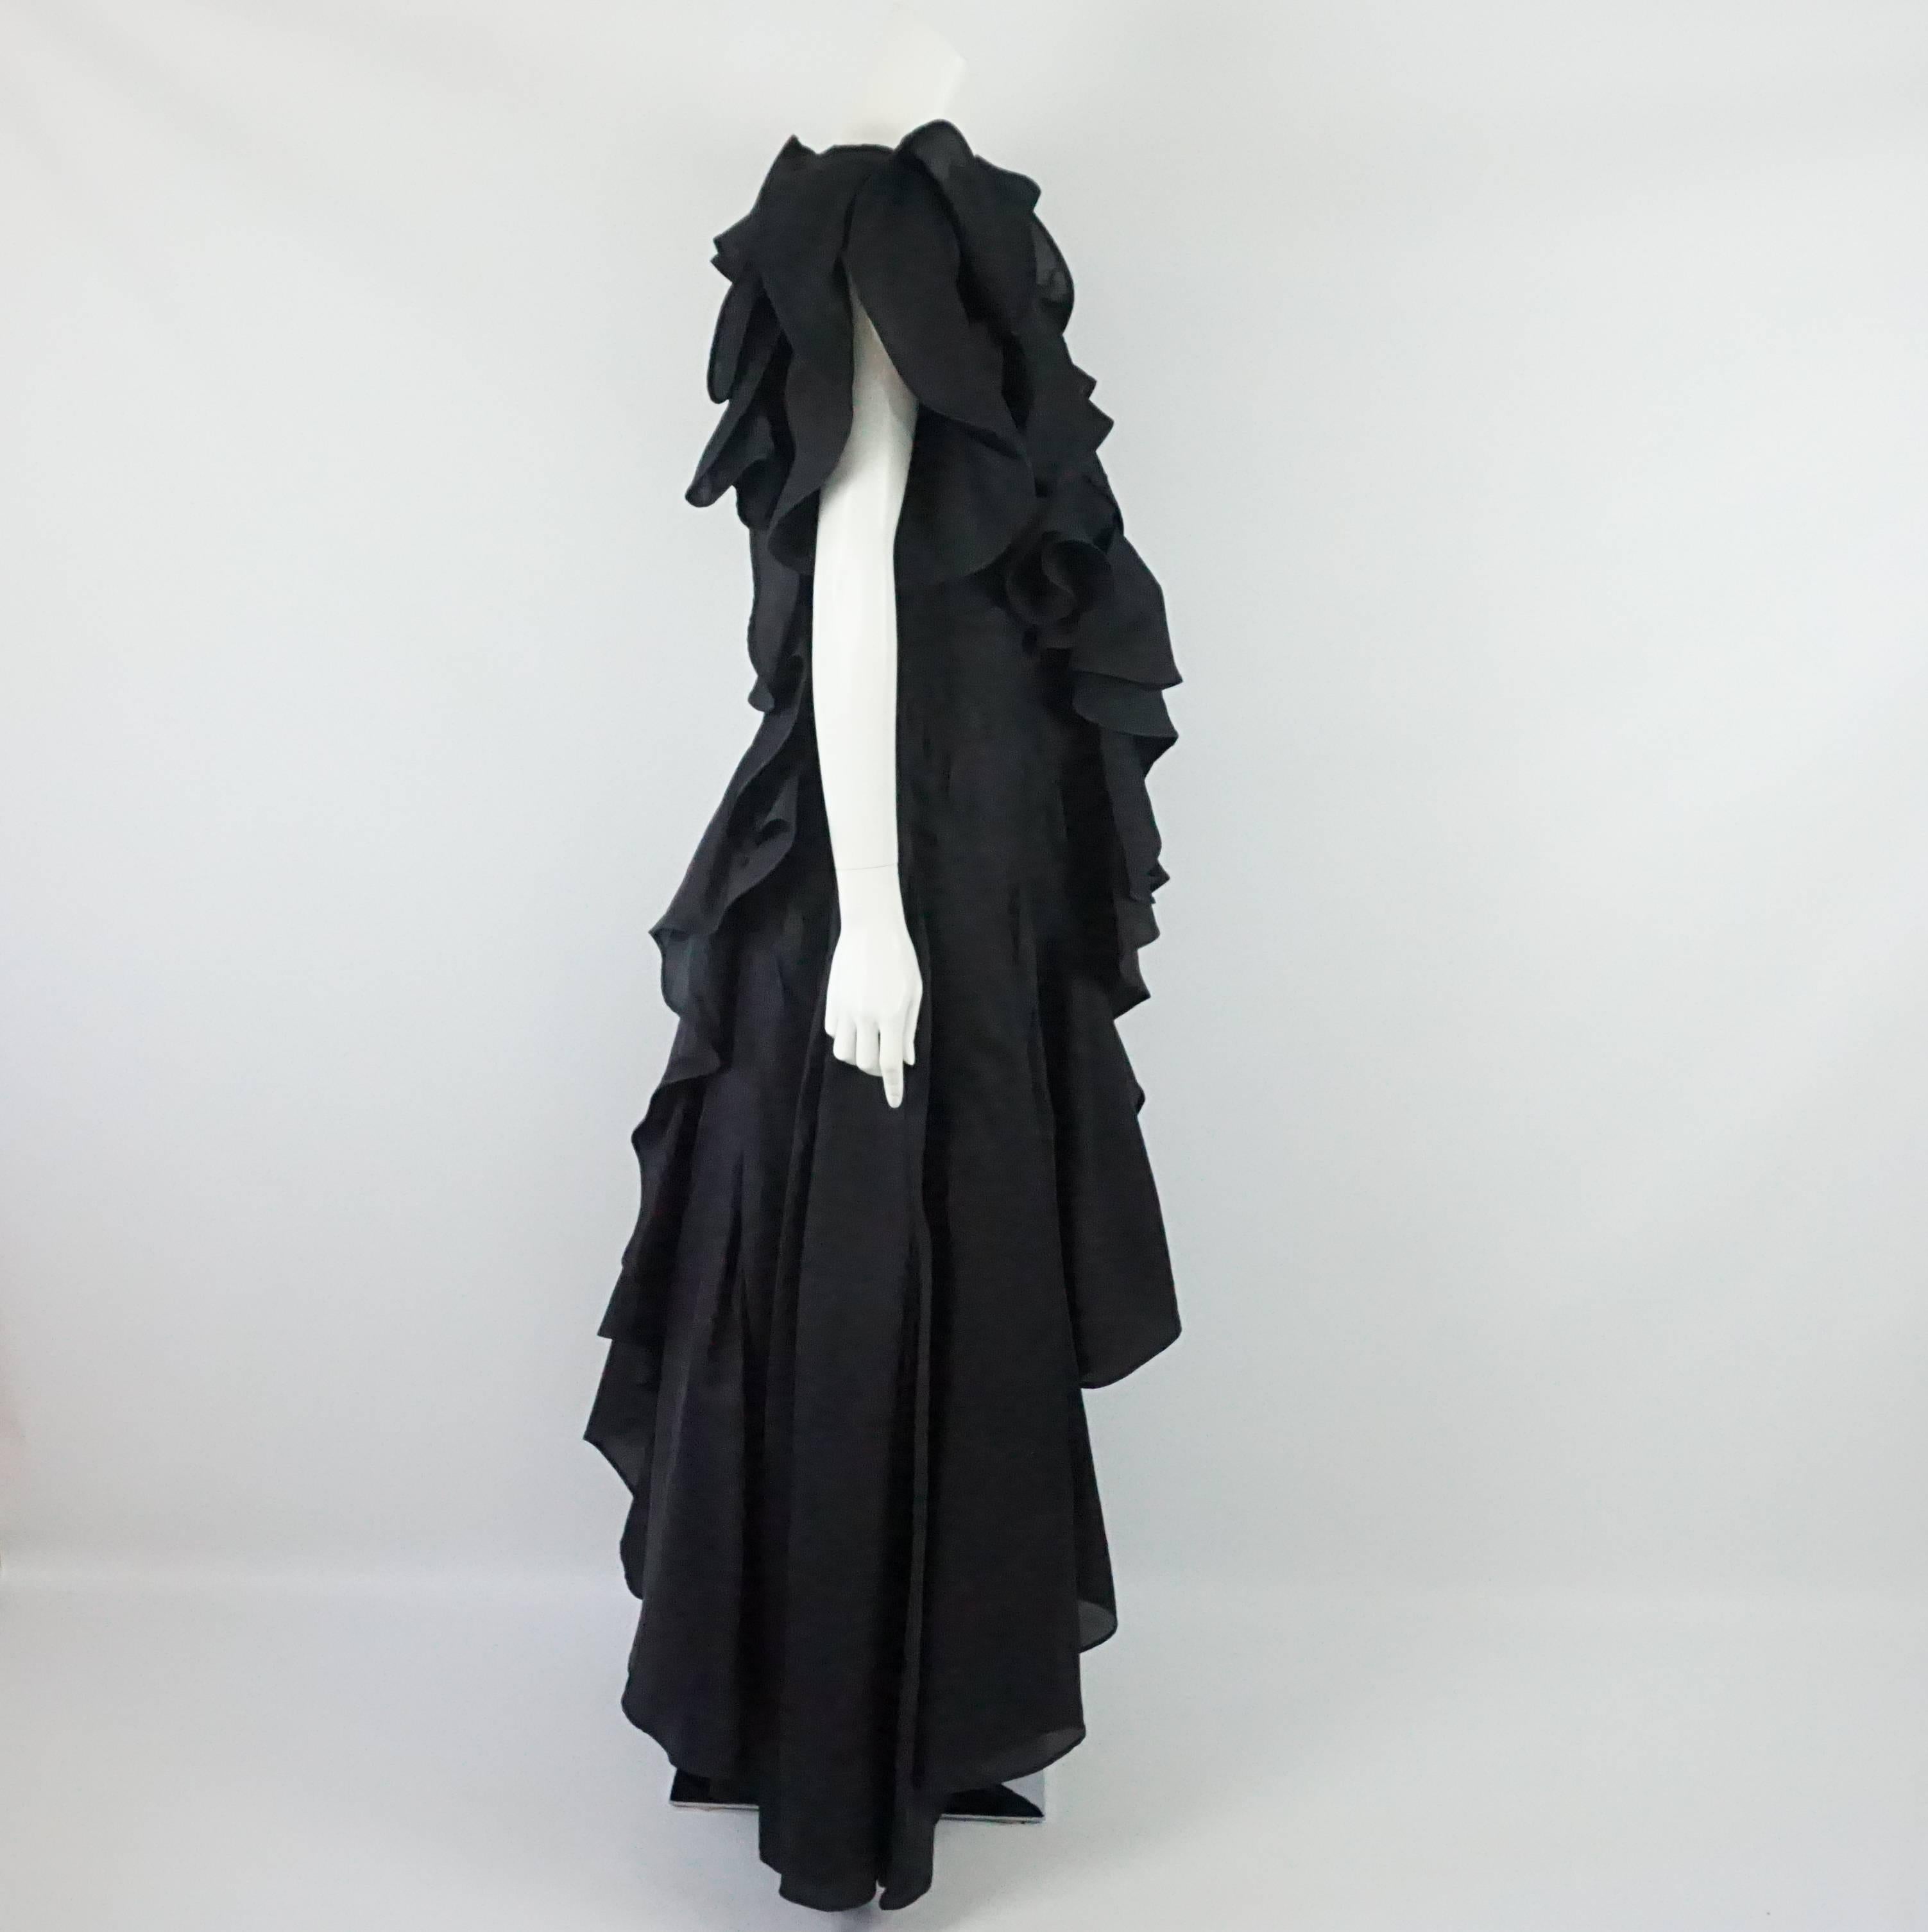 This Akira long coat is sleeveless and has large ruffles. The coat has an open and flowing structure. The front and back have a cascading form. It is in excellent condition. Size 8, circa 1980's. 

Measurements
Bust: 36